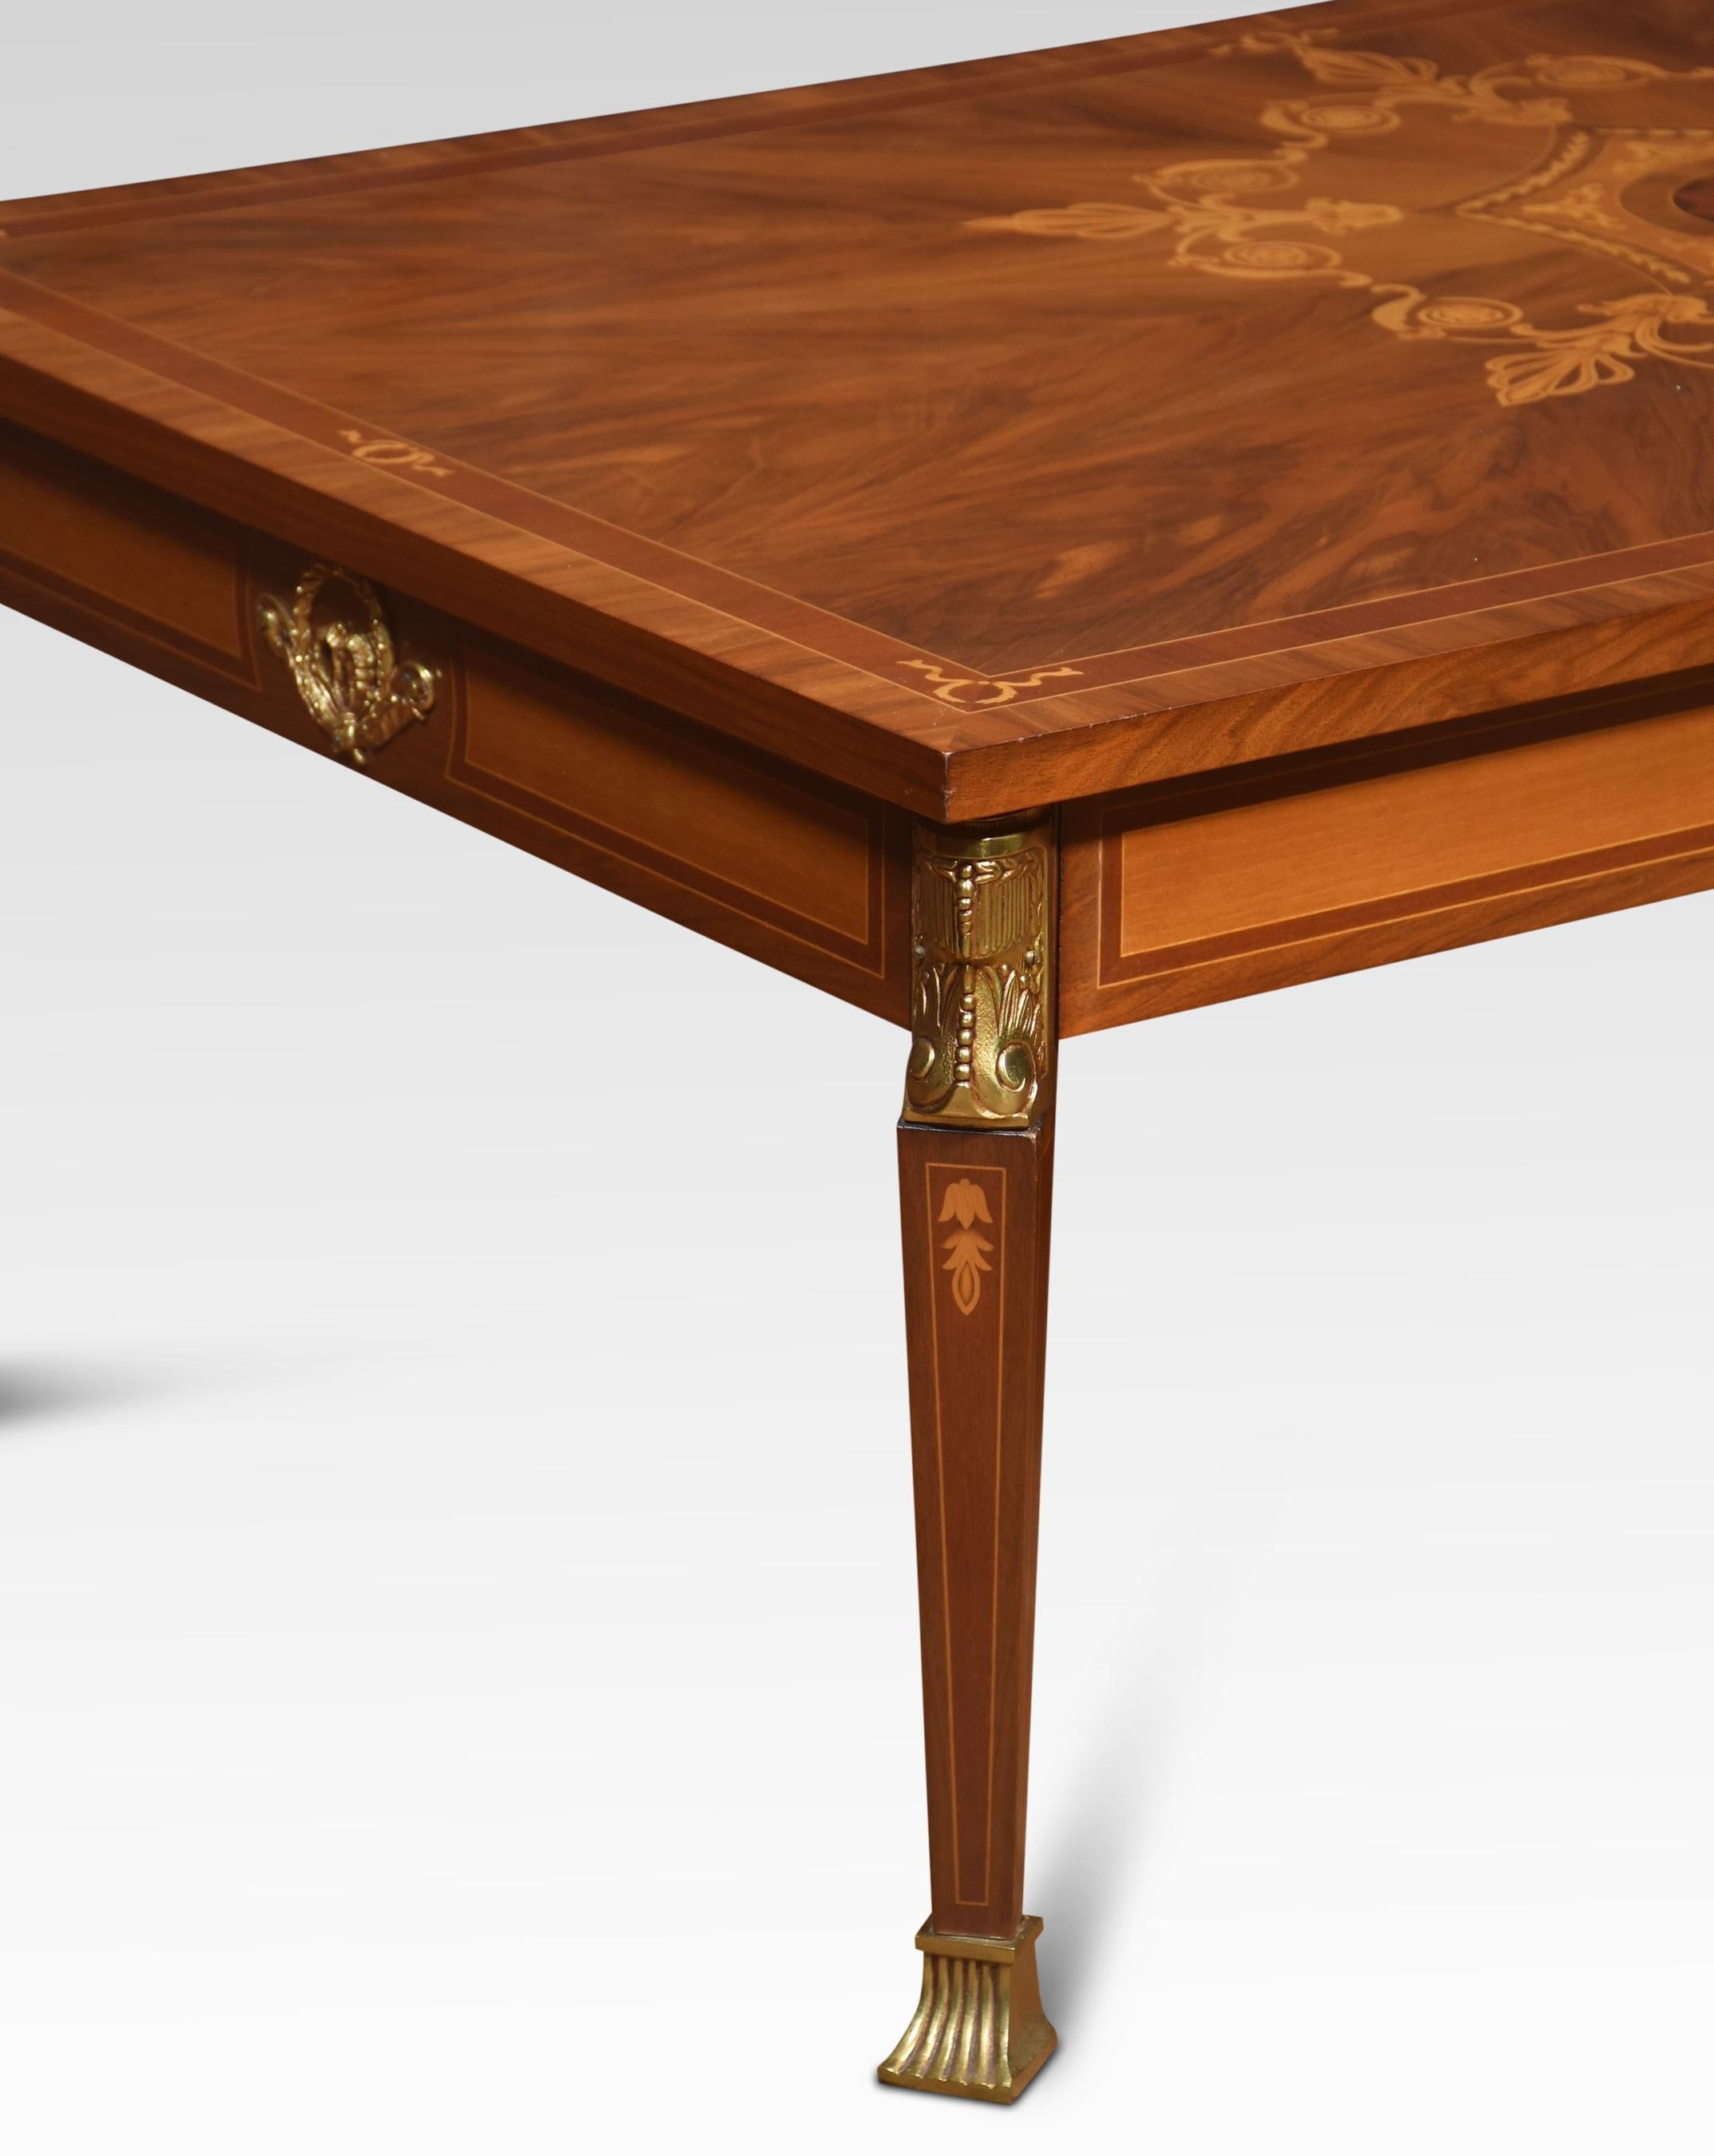 Walnut inlaid coffee table, the inlaid top with floral swag and string inlay. All raised on square tapering legs terminating in brass feet.
Dimensions
Height 19 Inches
Width 55.5 Inches
Depth 31.5 Inches